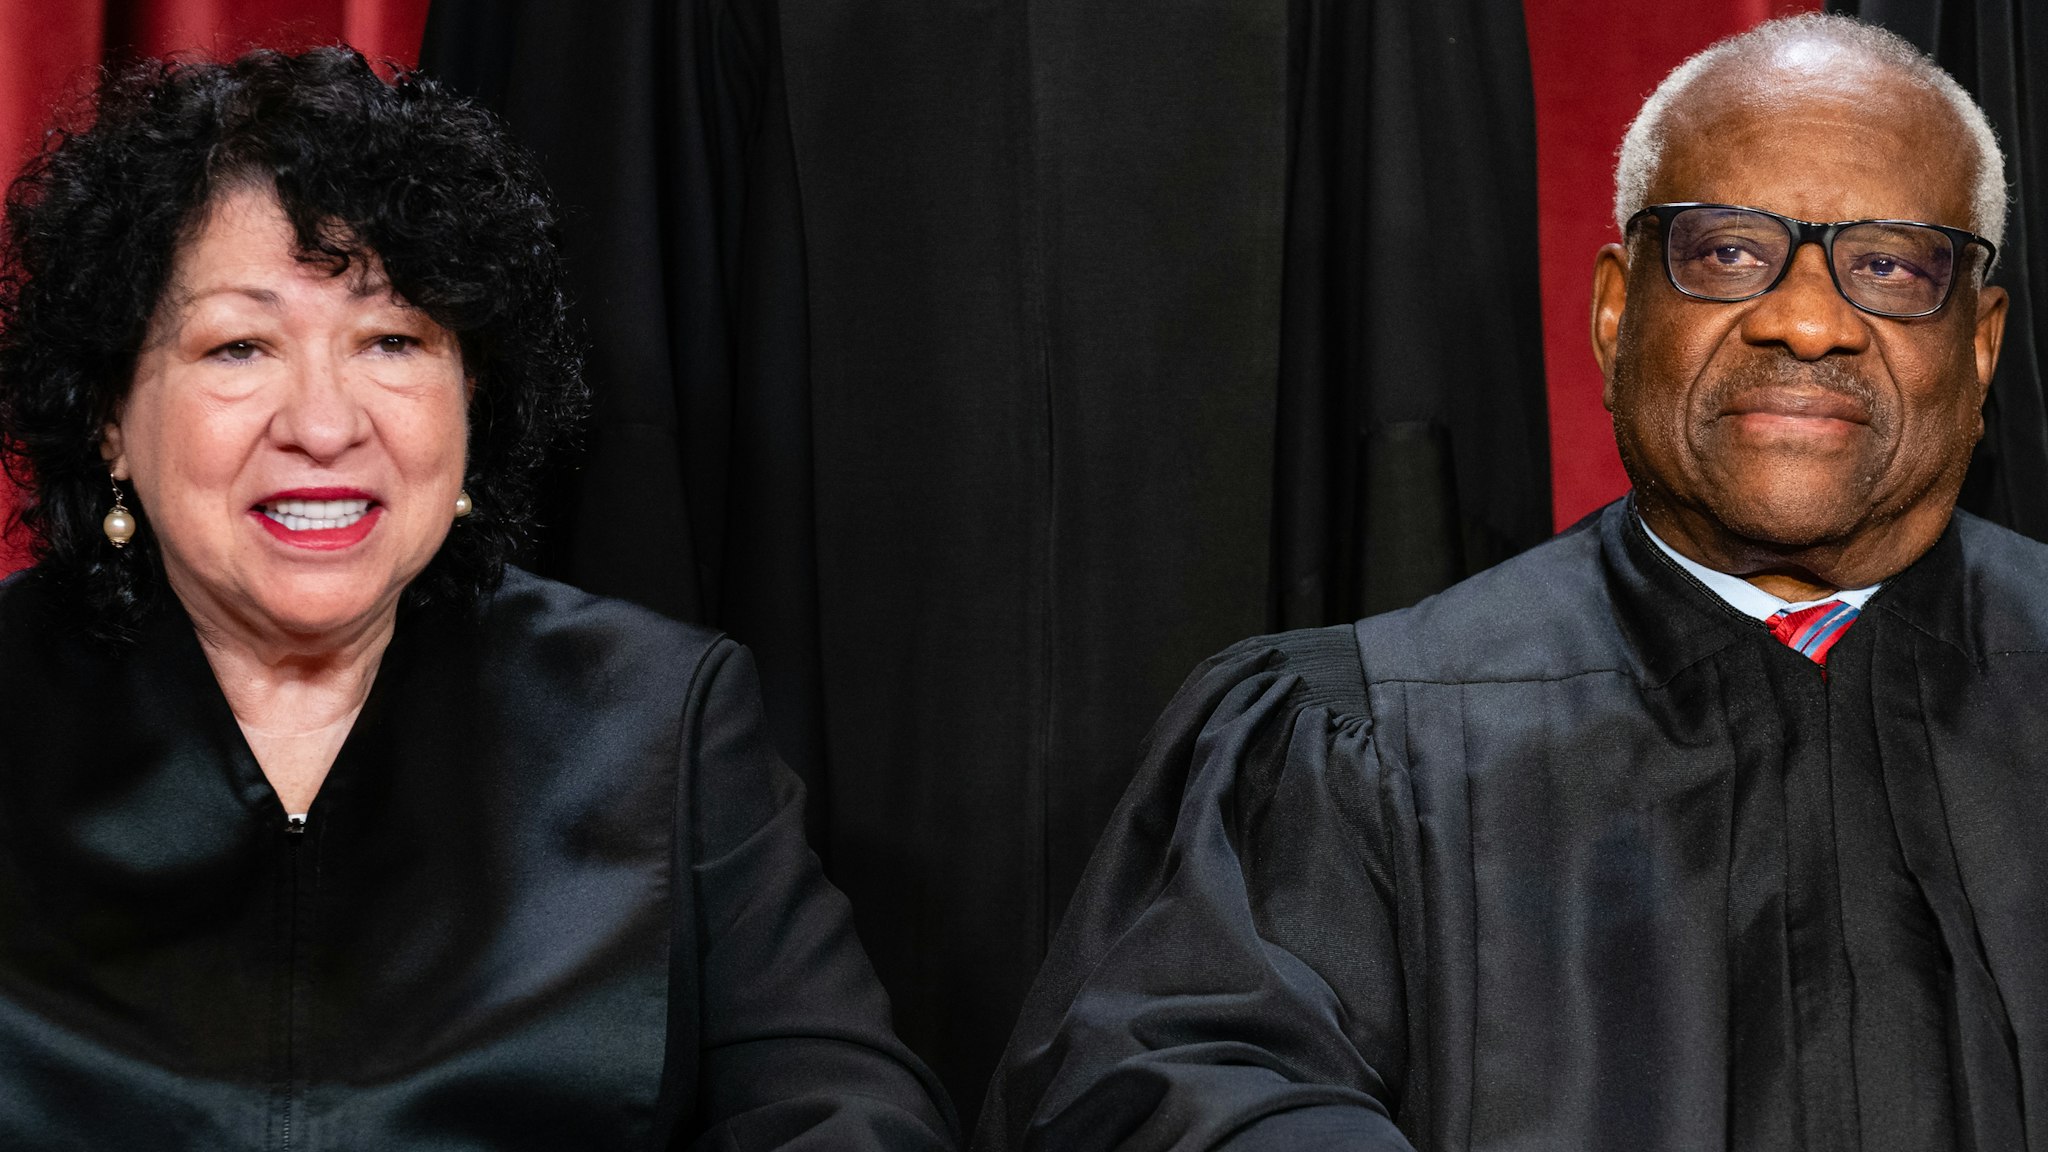 Associate Justice Sonia Sotomayor, left, and Associate Justice Clarence Thomas during the formal group photograph at the Supreme Court in Washington, DC, US, on Friday, Oct. 7, 2022.